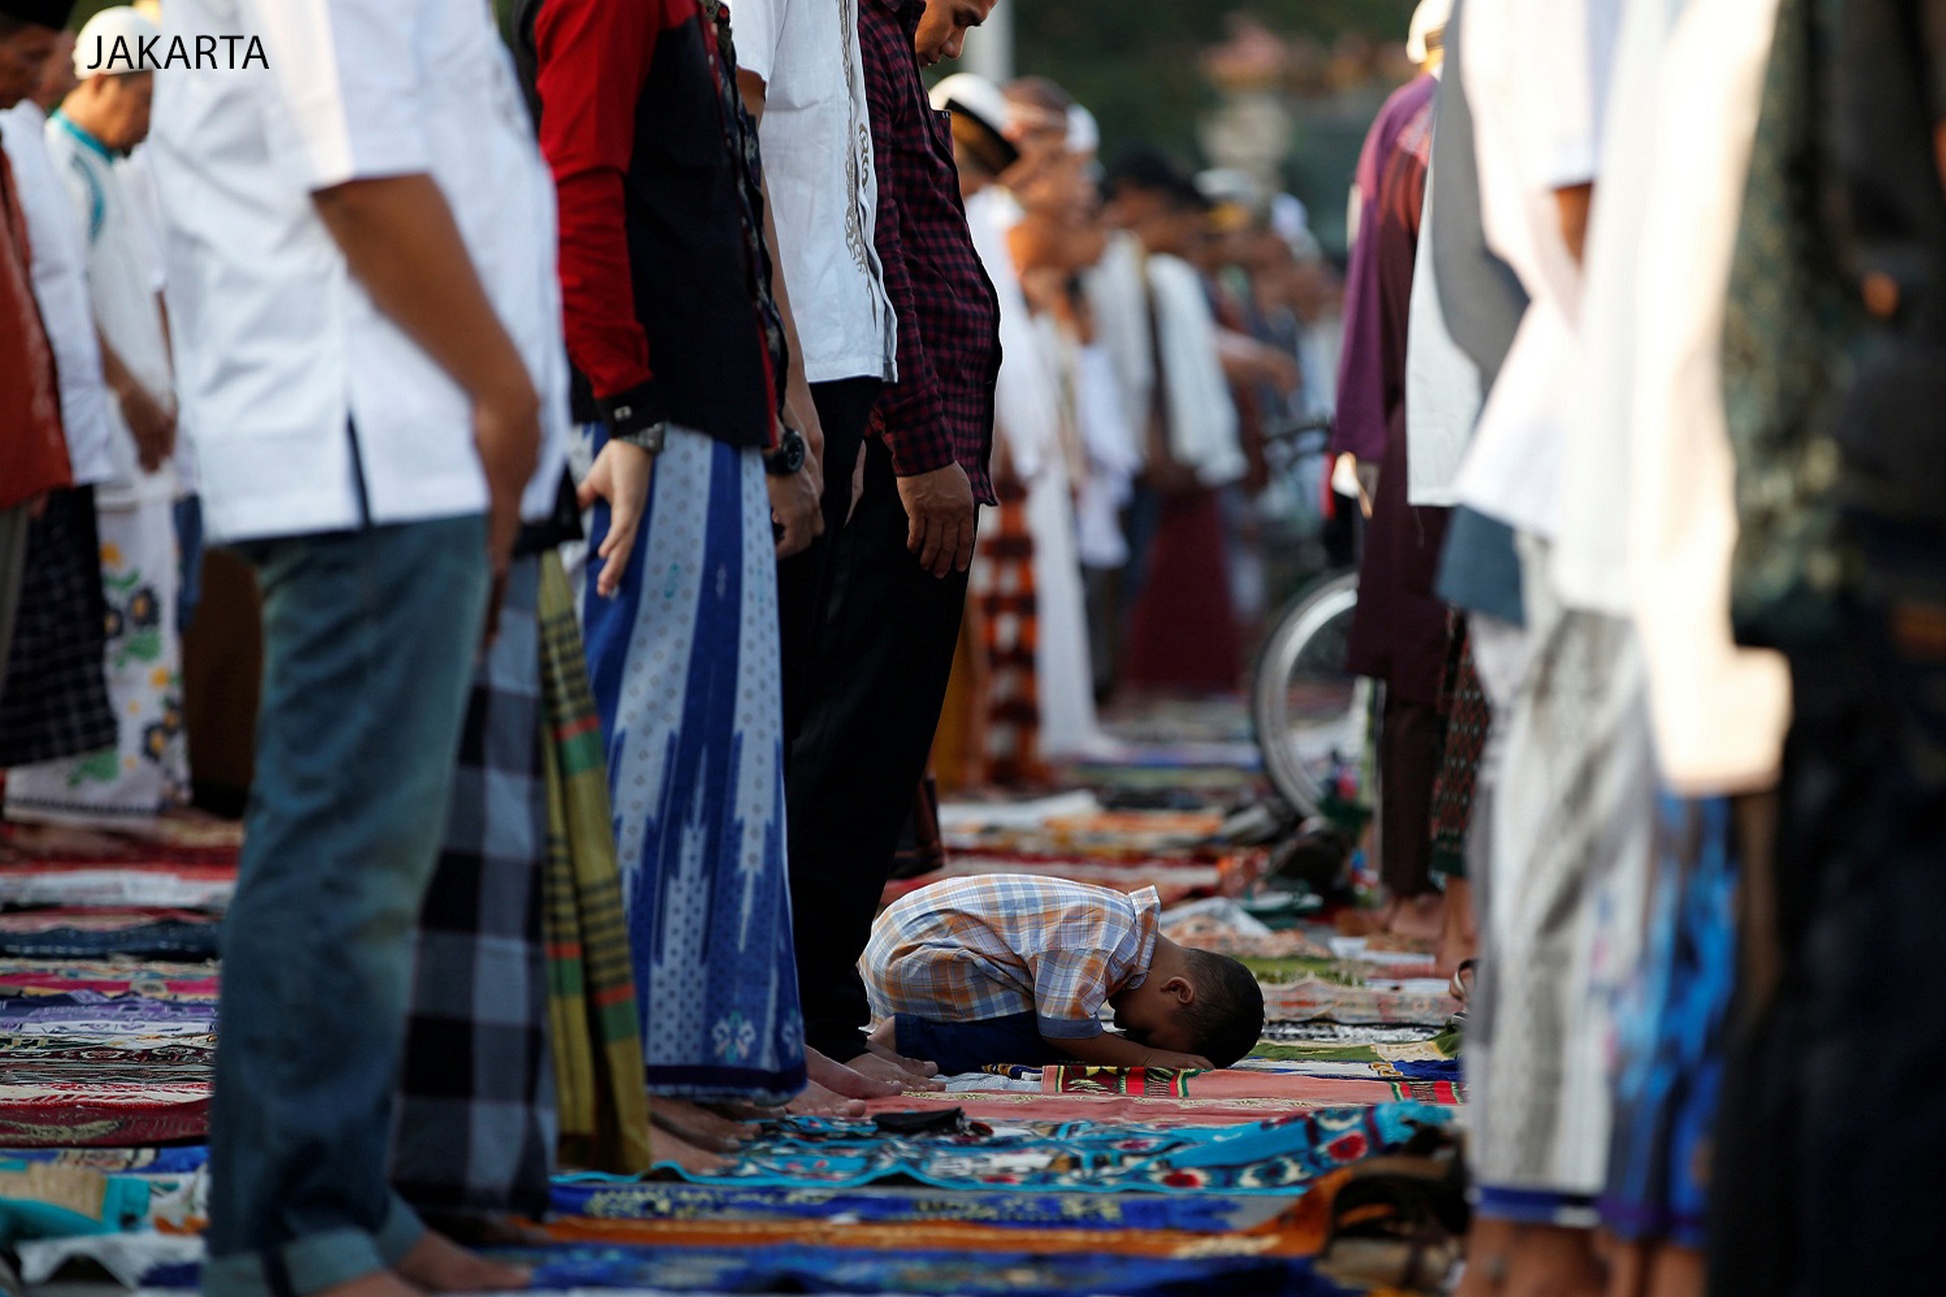 A child attends Eid al-Fitr prayers to mark the end of the holy fasting month of Ramadan at Sunda Kelapa port in Jakarta, Indonesia July 6, 2016. REUTERS/Darren Whiteside